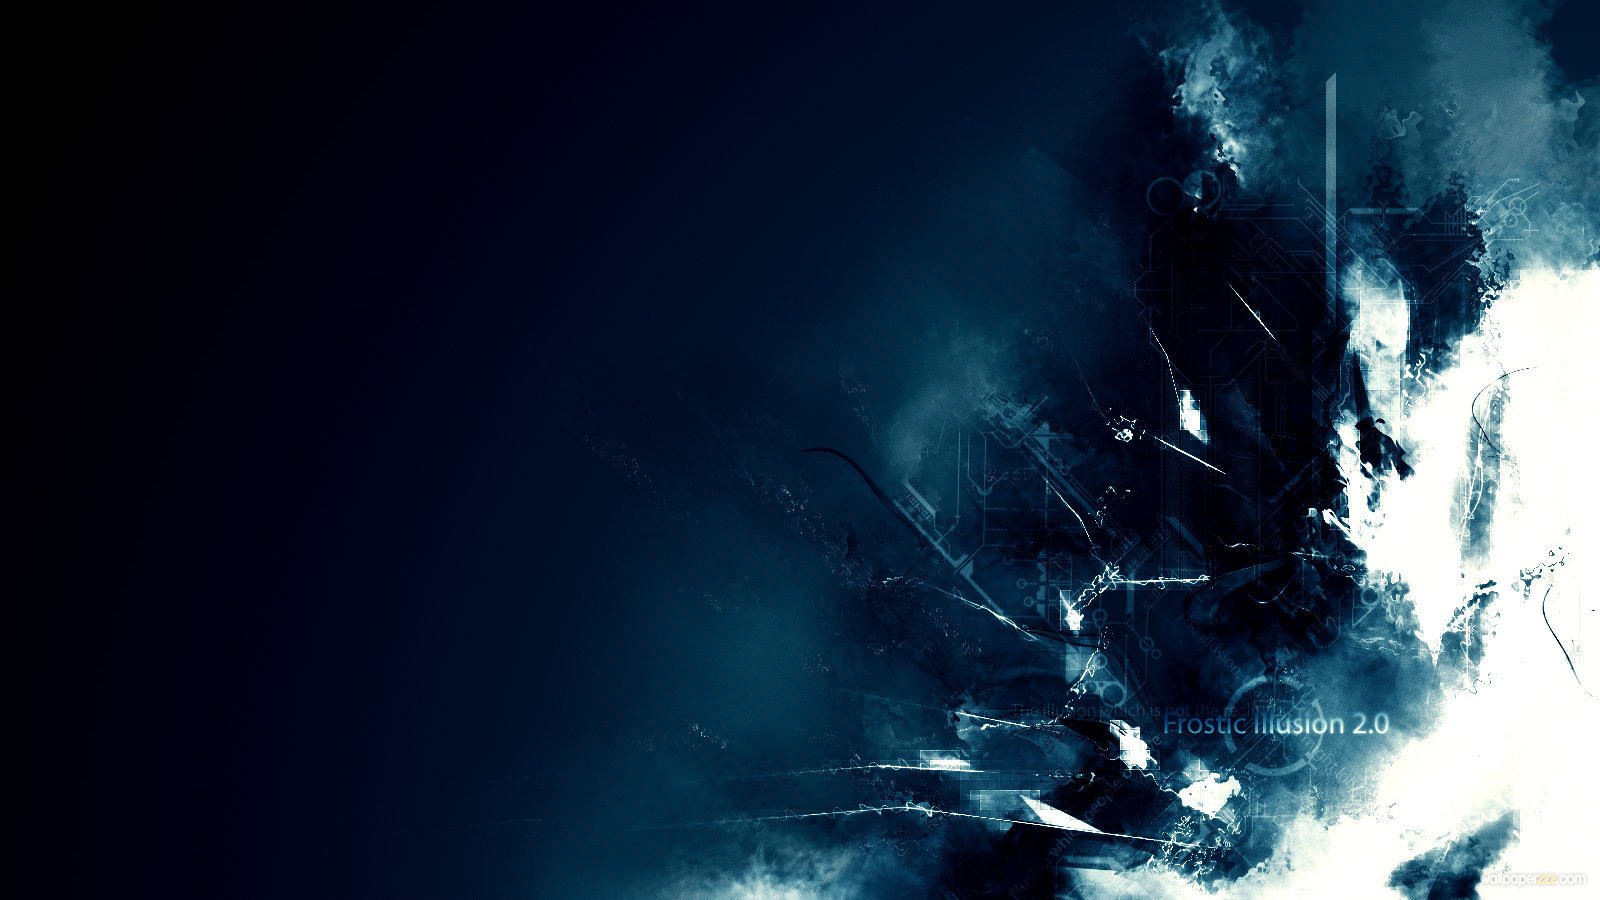 Download Frostic Illusion Widescreen WallpaperFree Wallpaper